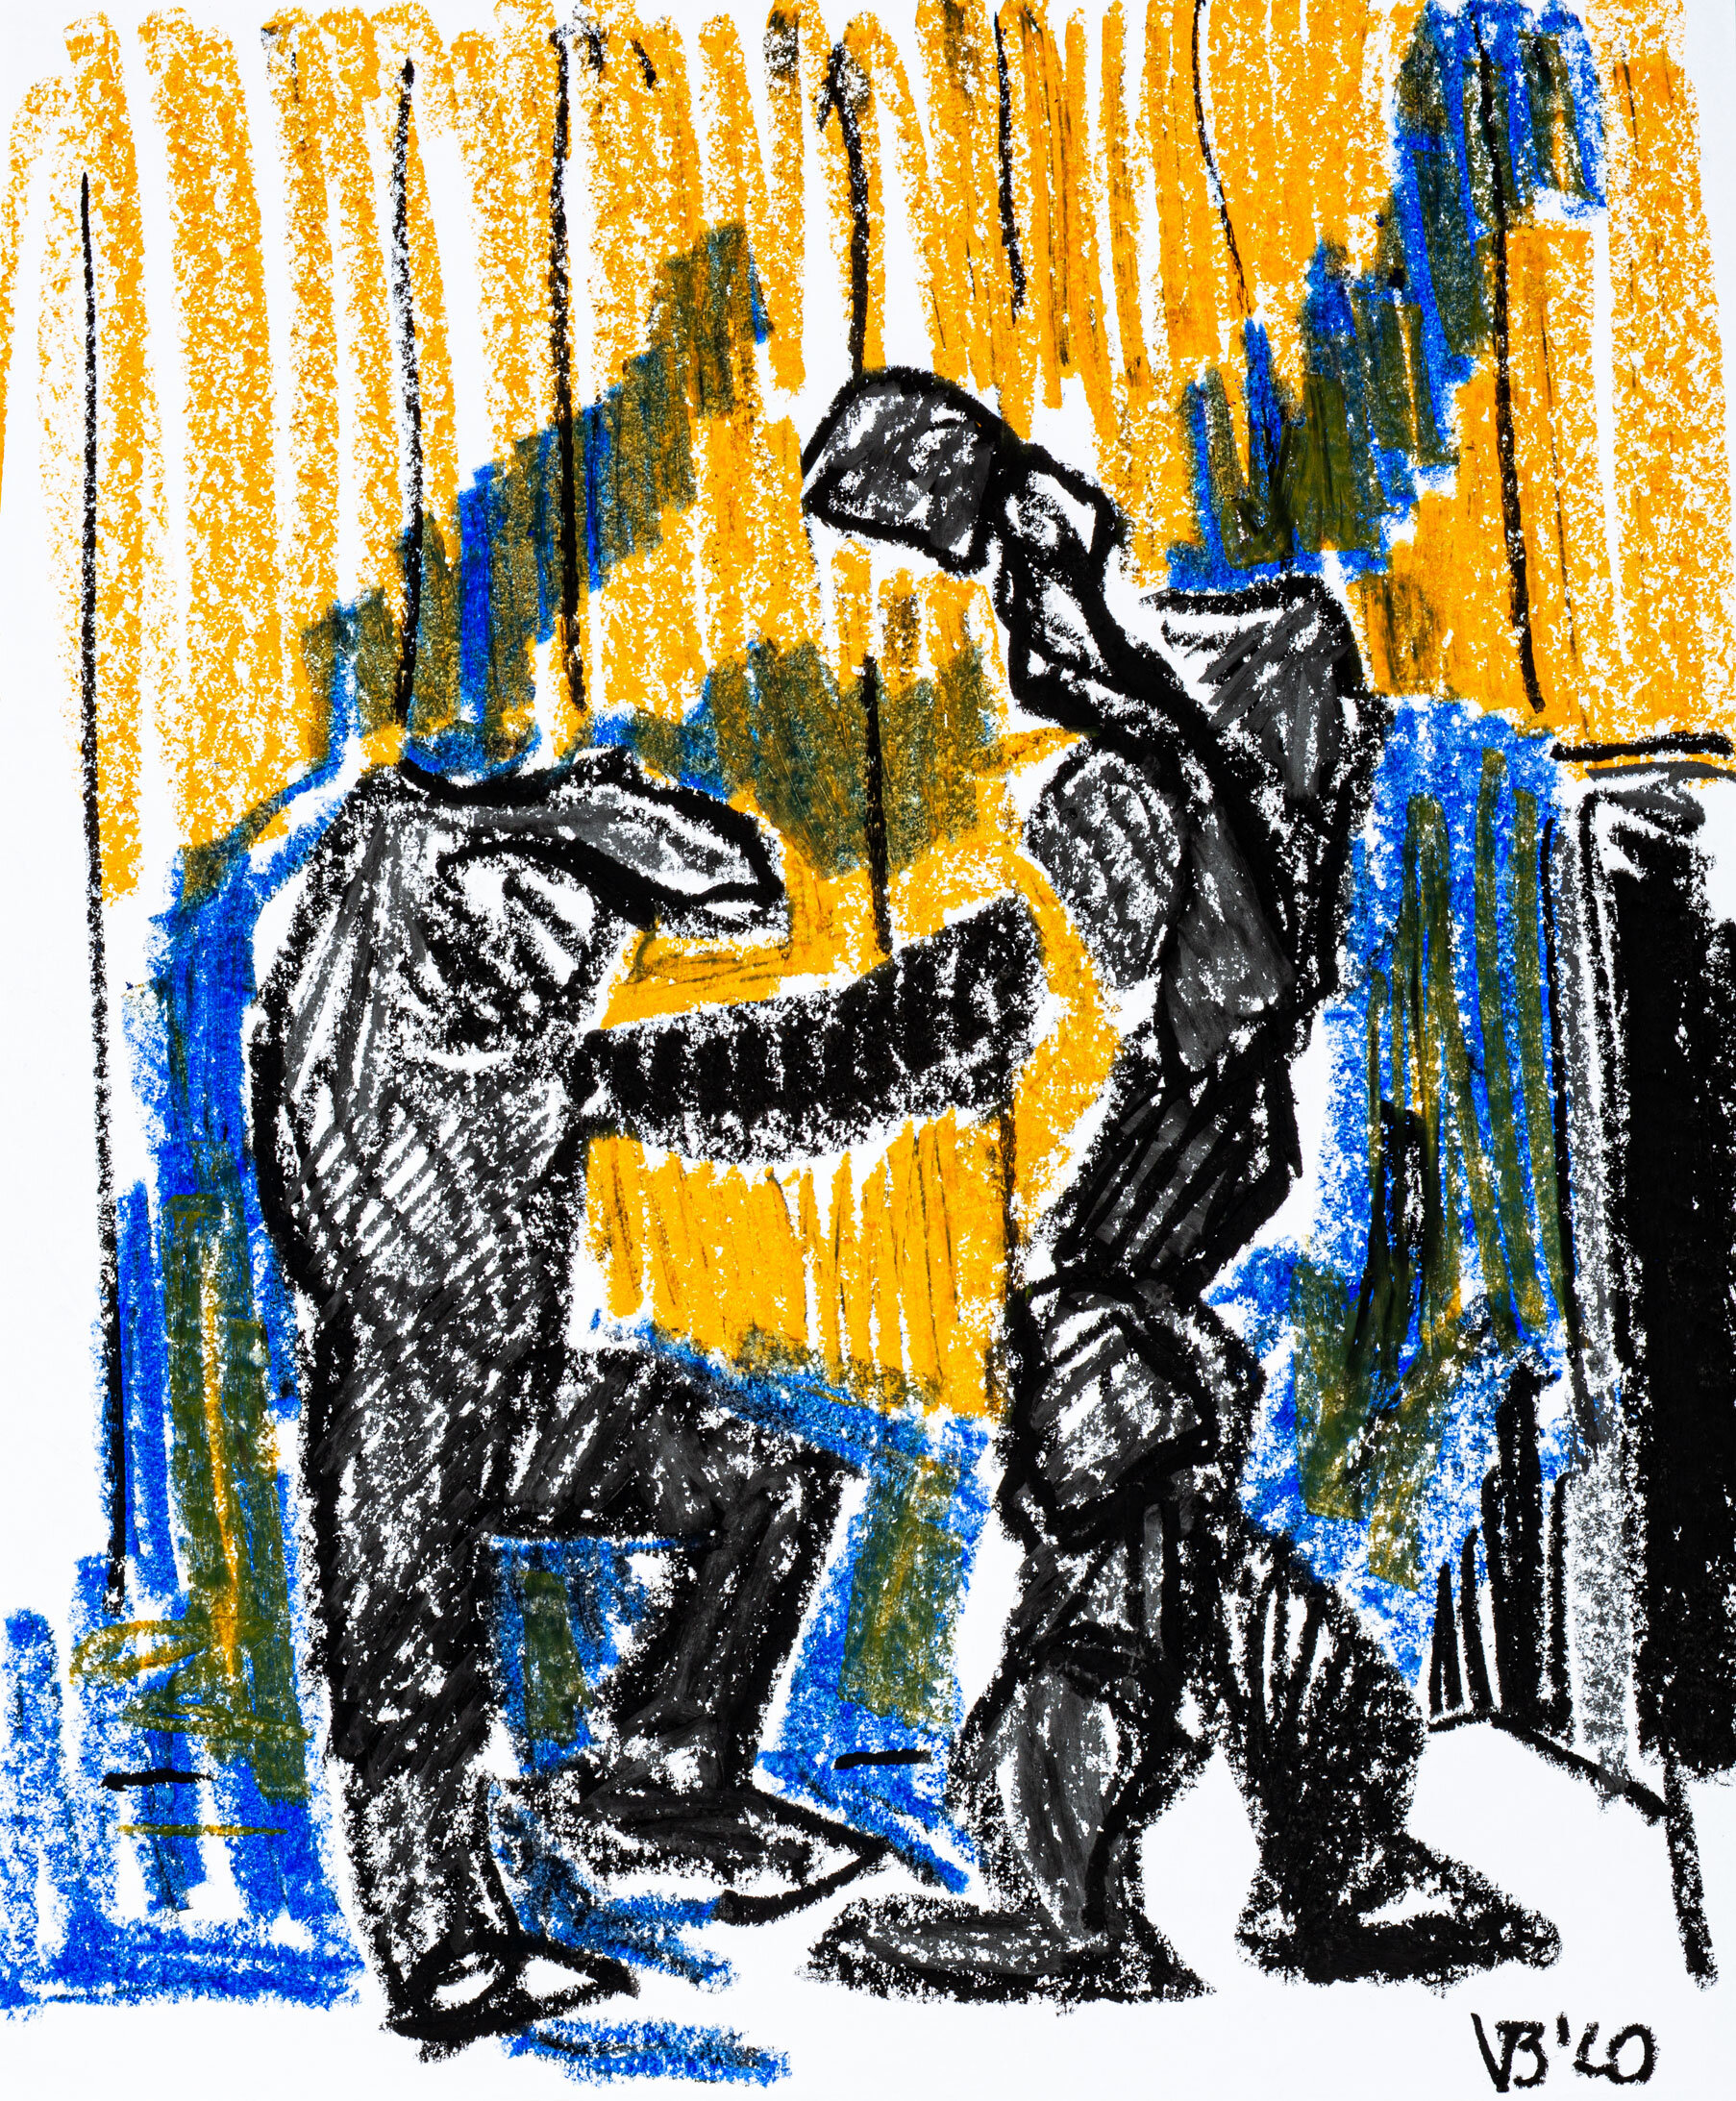 Fight of Wooden Figurines, 2020 - oil pastel on paper, 14x17in